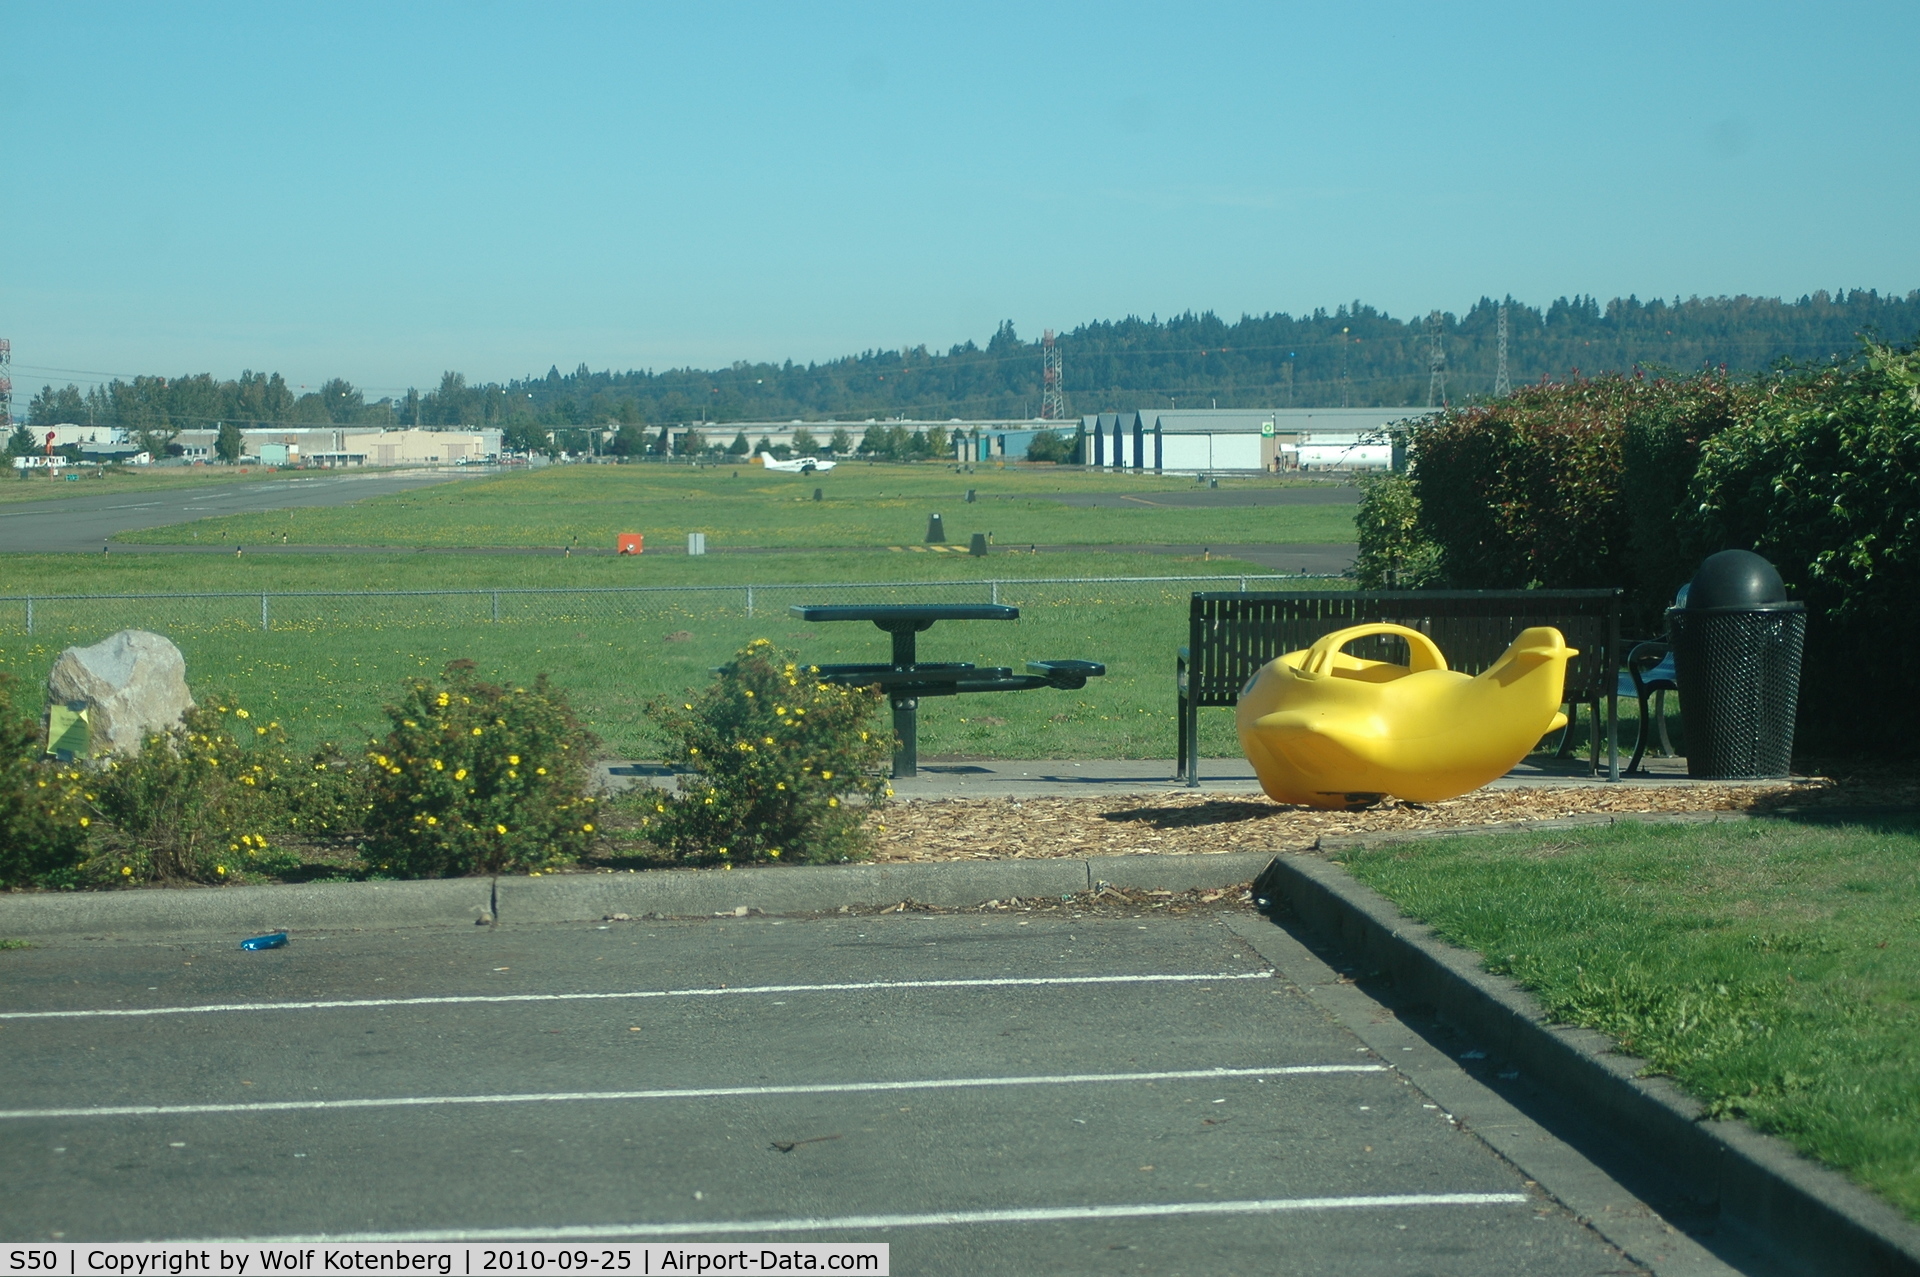 Auburn Municipal Airport (S50) - park area set up for airplane watching